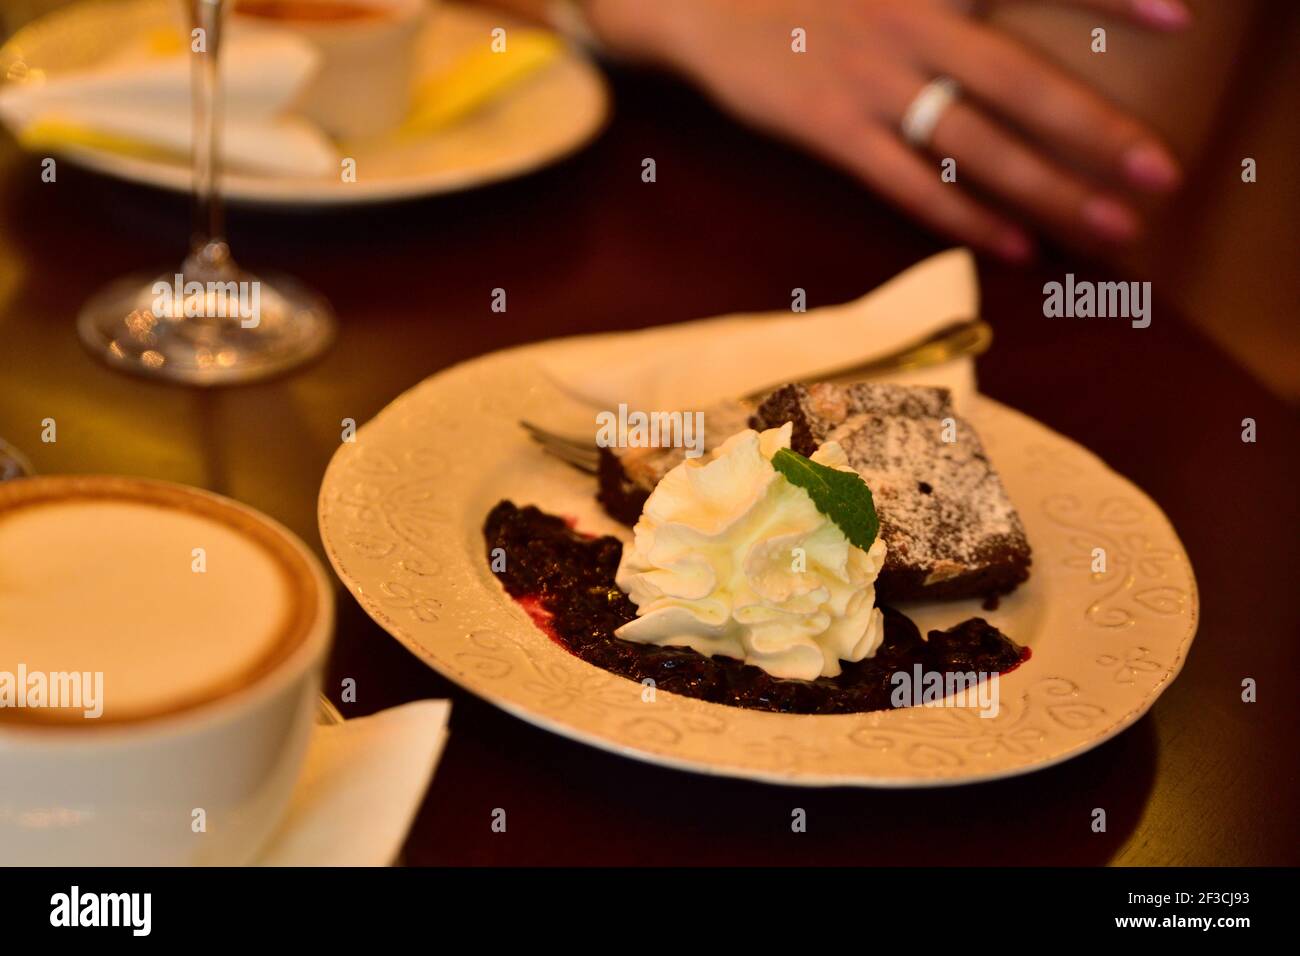 Restaurant food with fresh ingredients - chocolate cake with whipped cream and coffee in the background Stock Photo